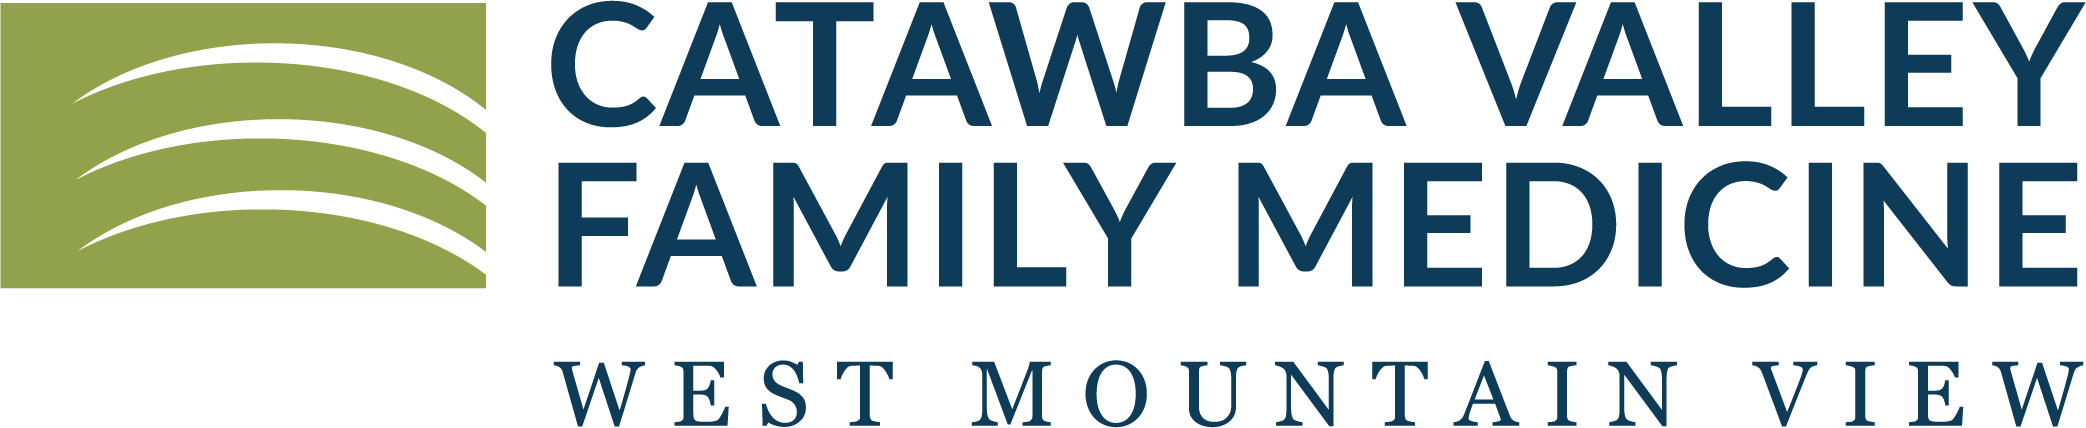 Catawba Valley Family Medicine – West Mountain View